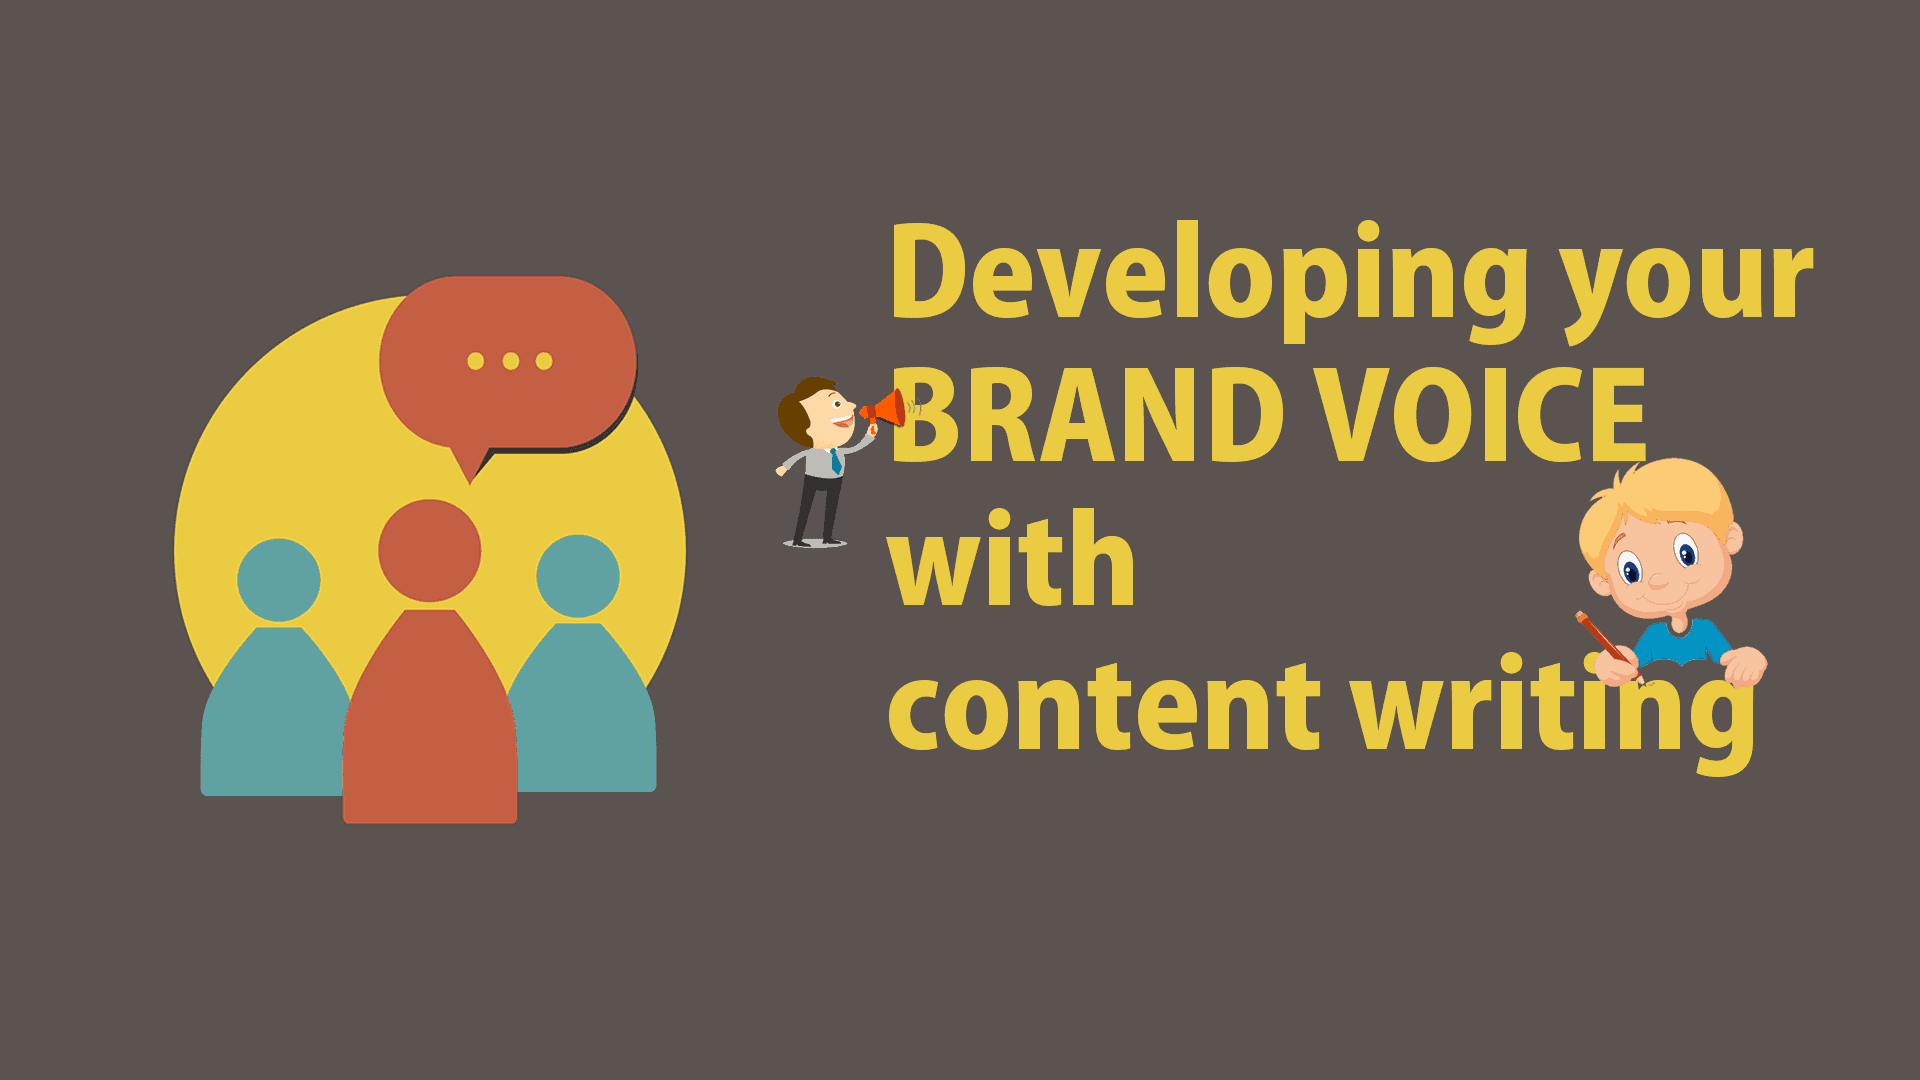 Developing brand voice with content writing